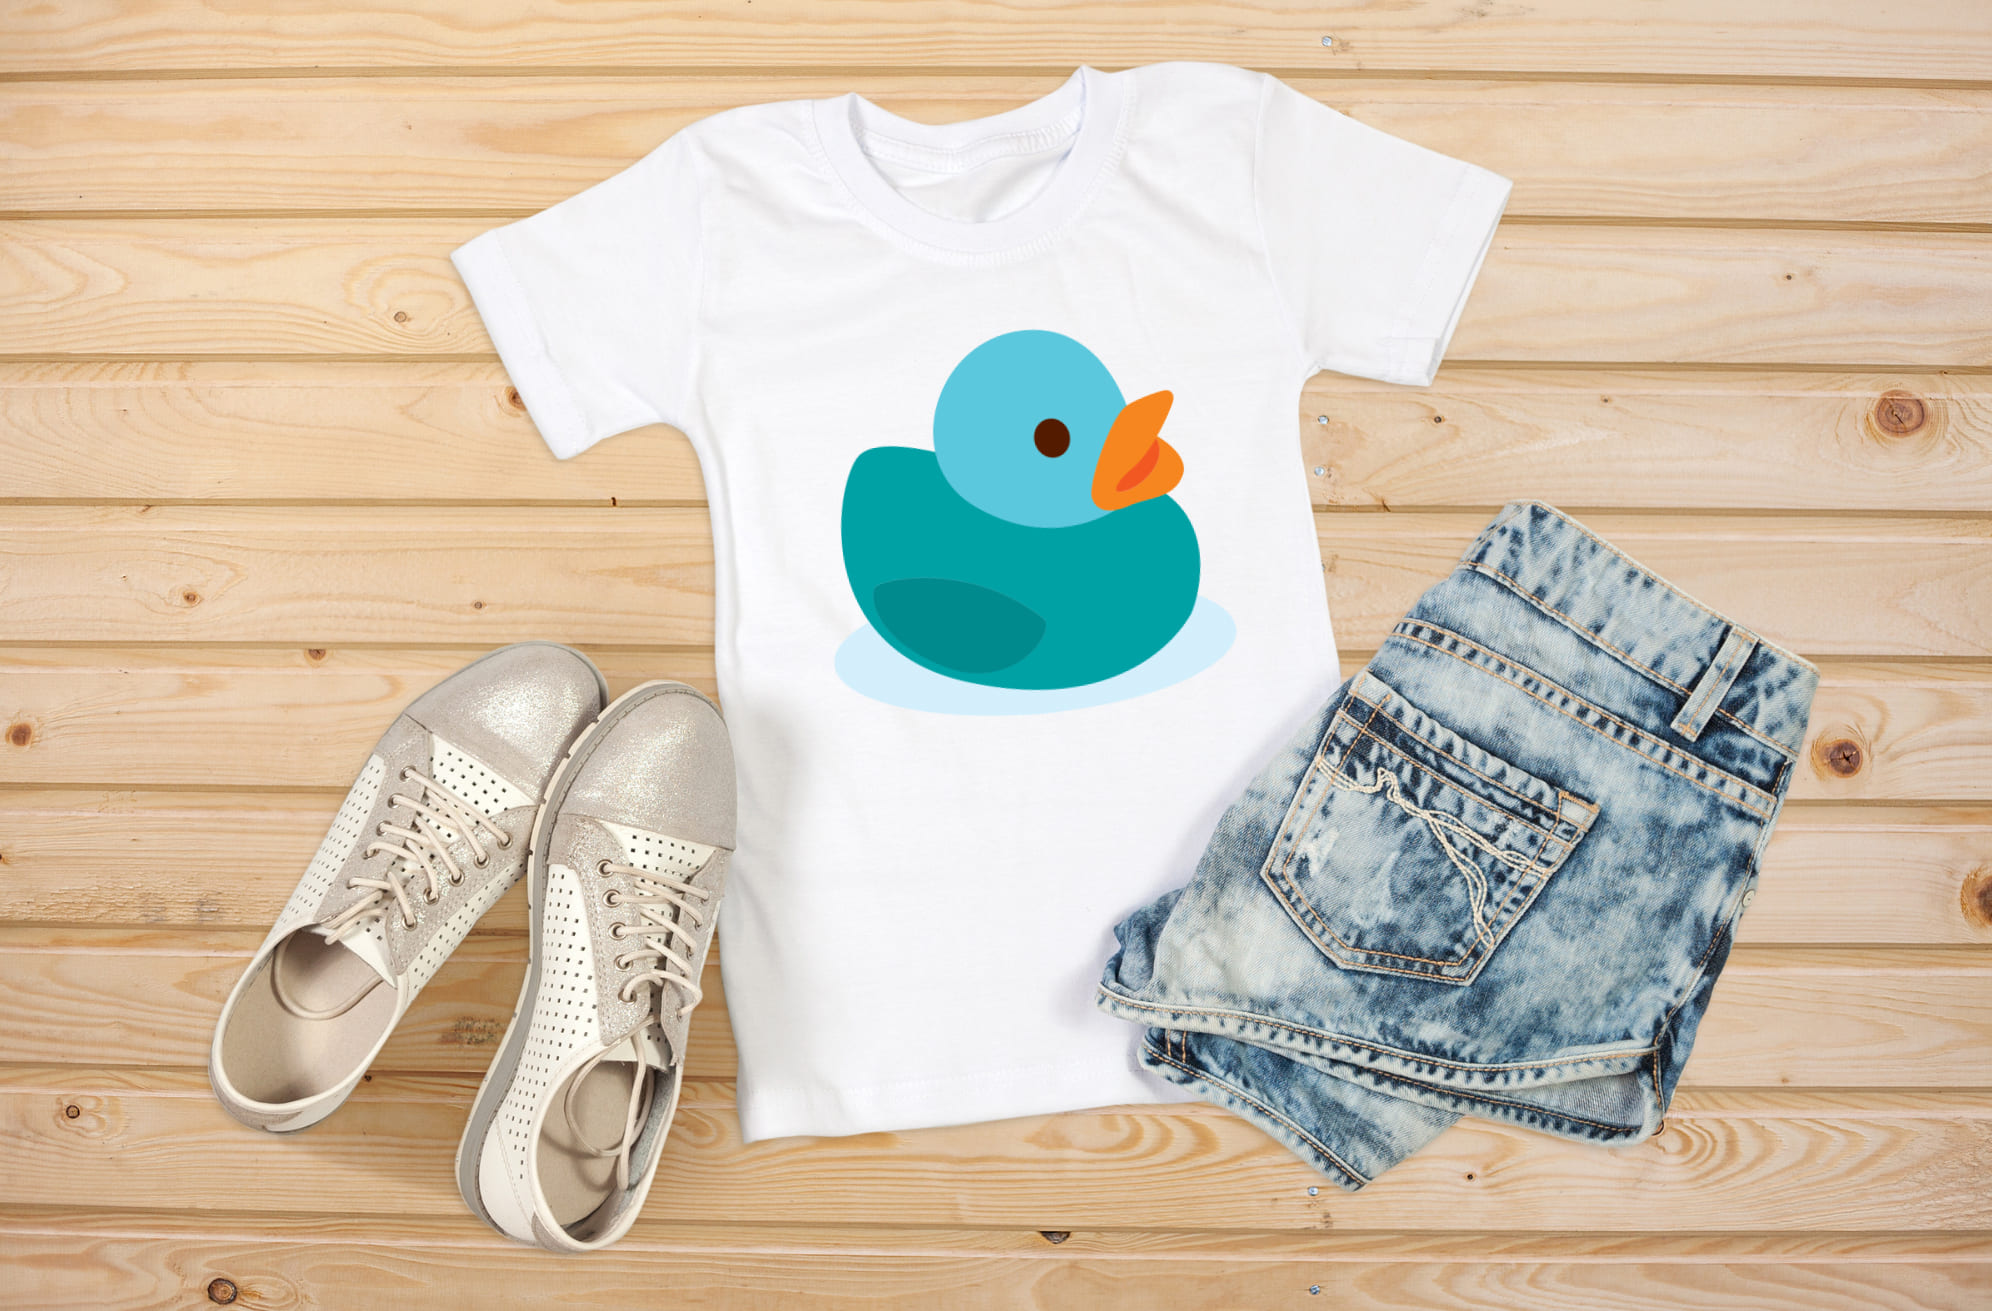 Image of a white t-shirt with an amazing rubber duck print in green.